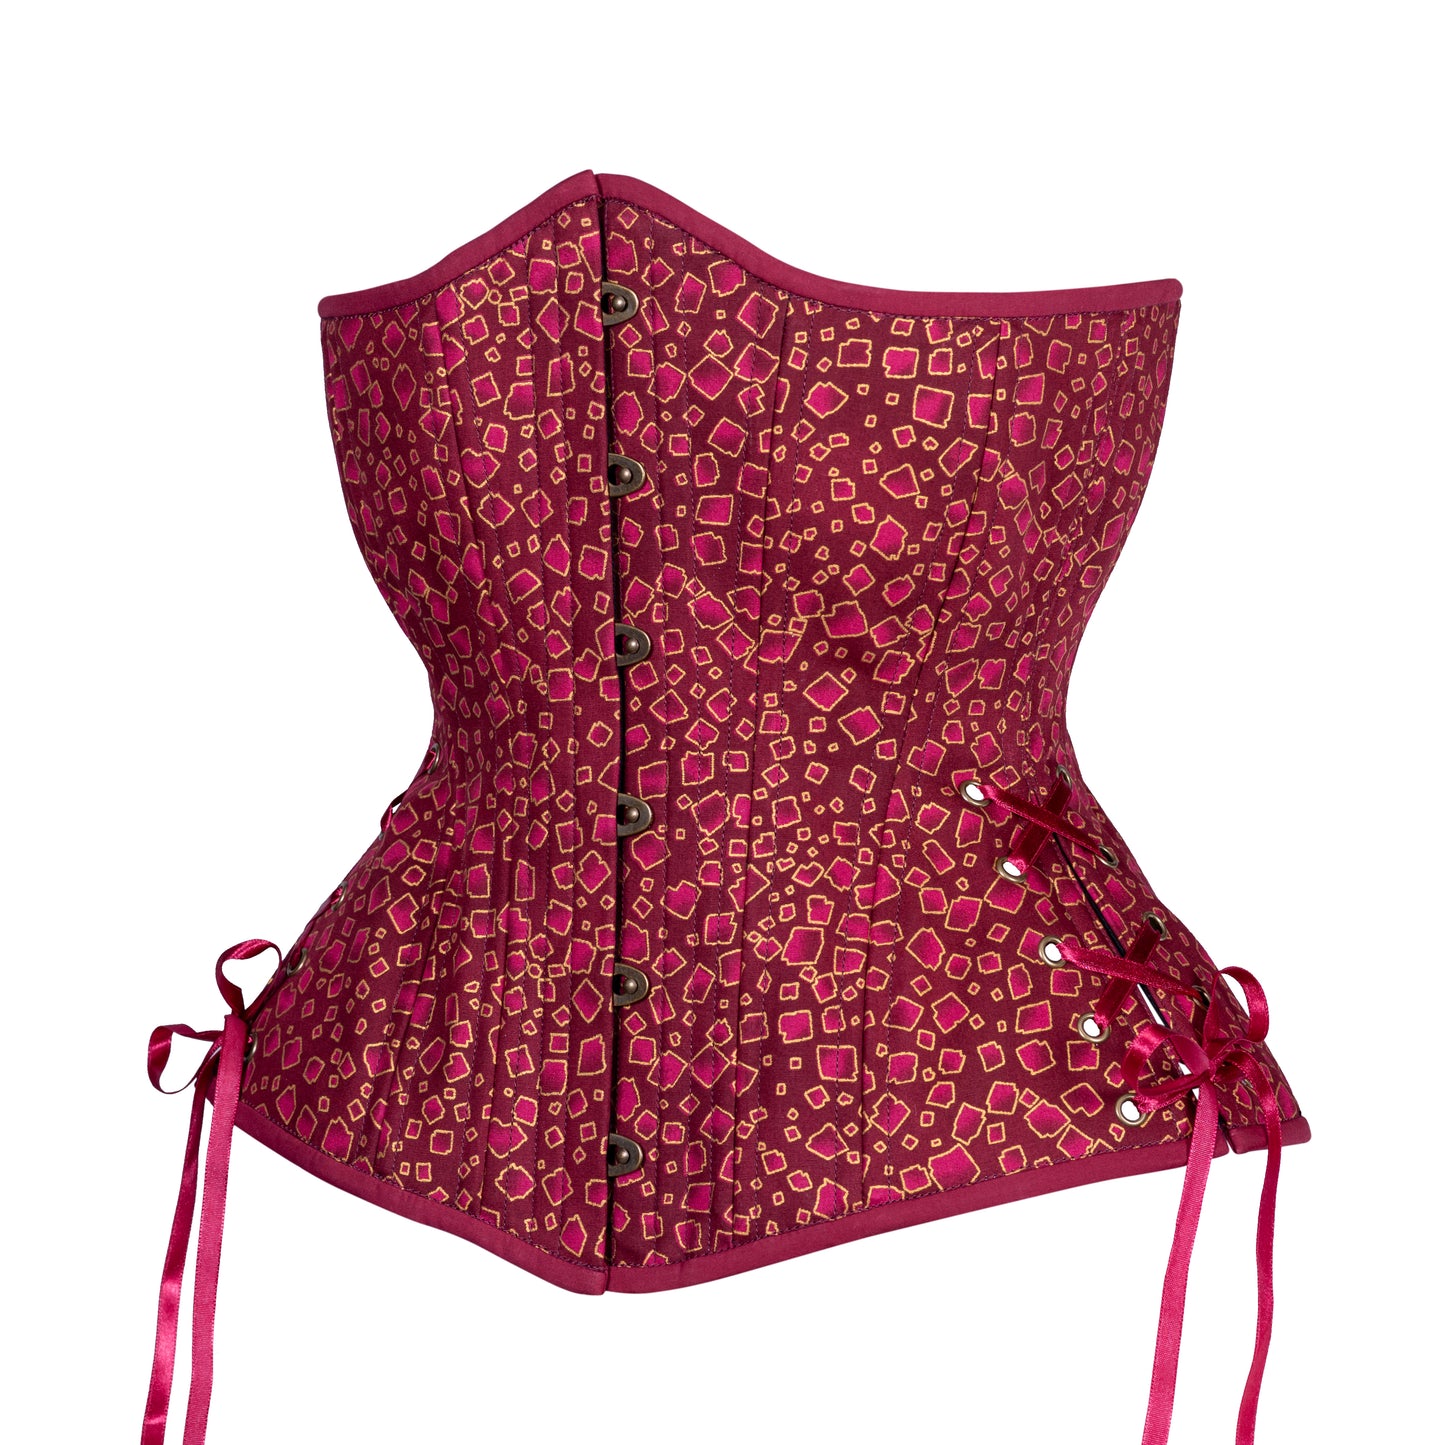 Imperfect Hearts Corset, Hourglass Silhouette, Long – Timeless Trends